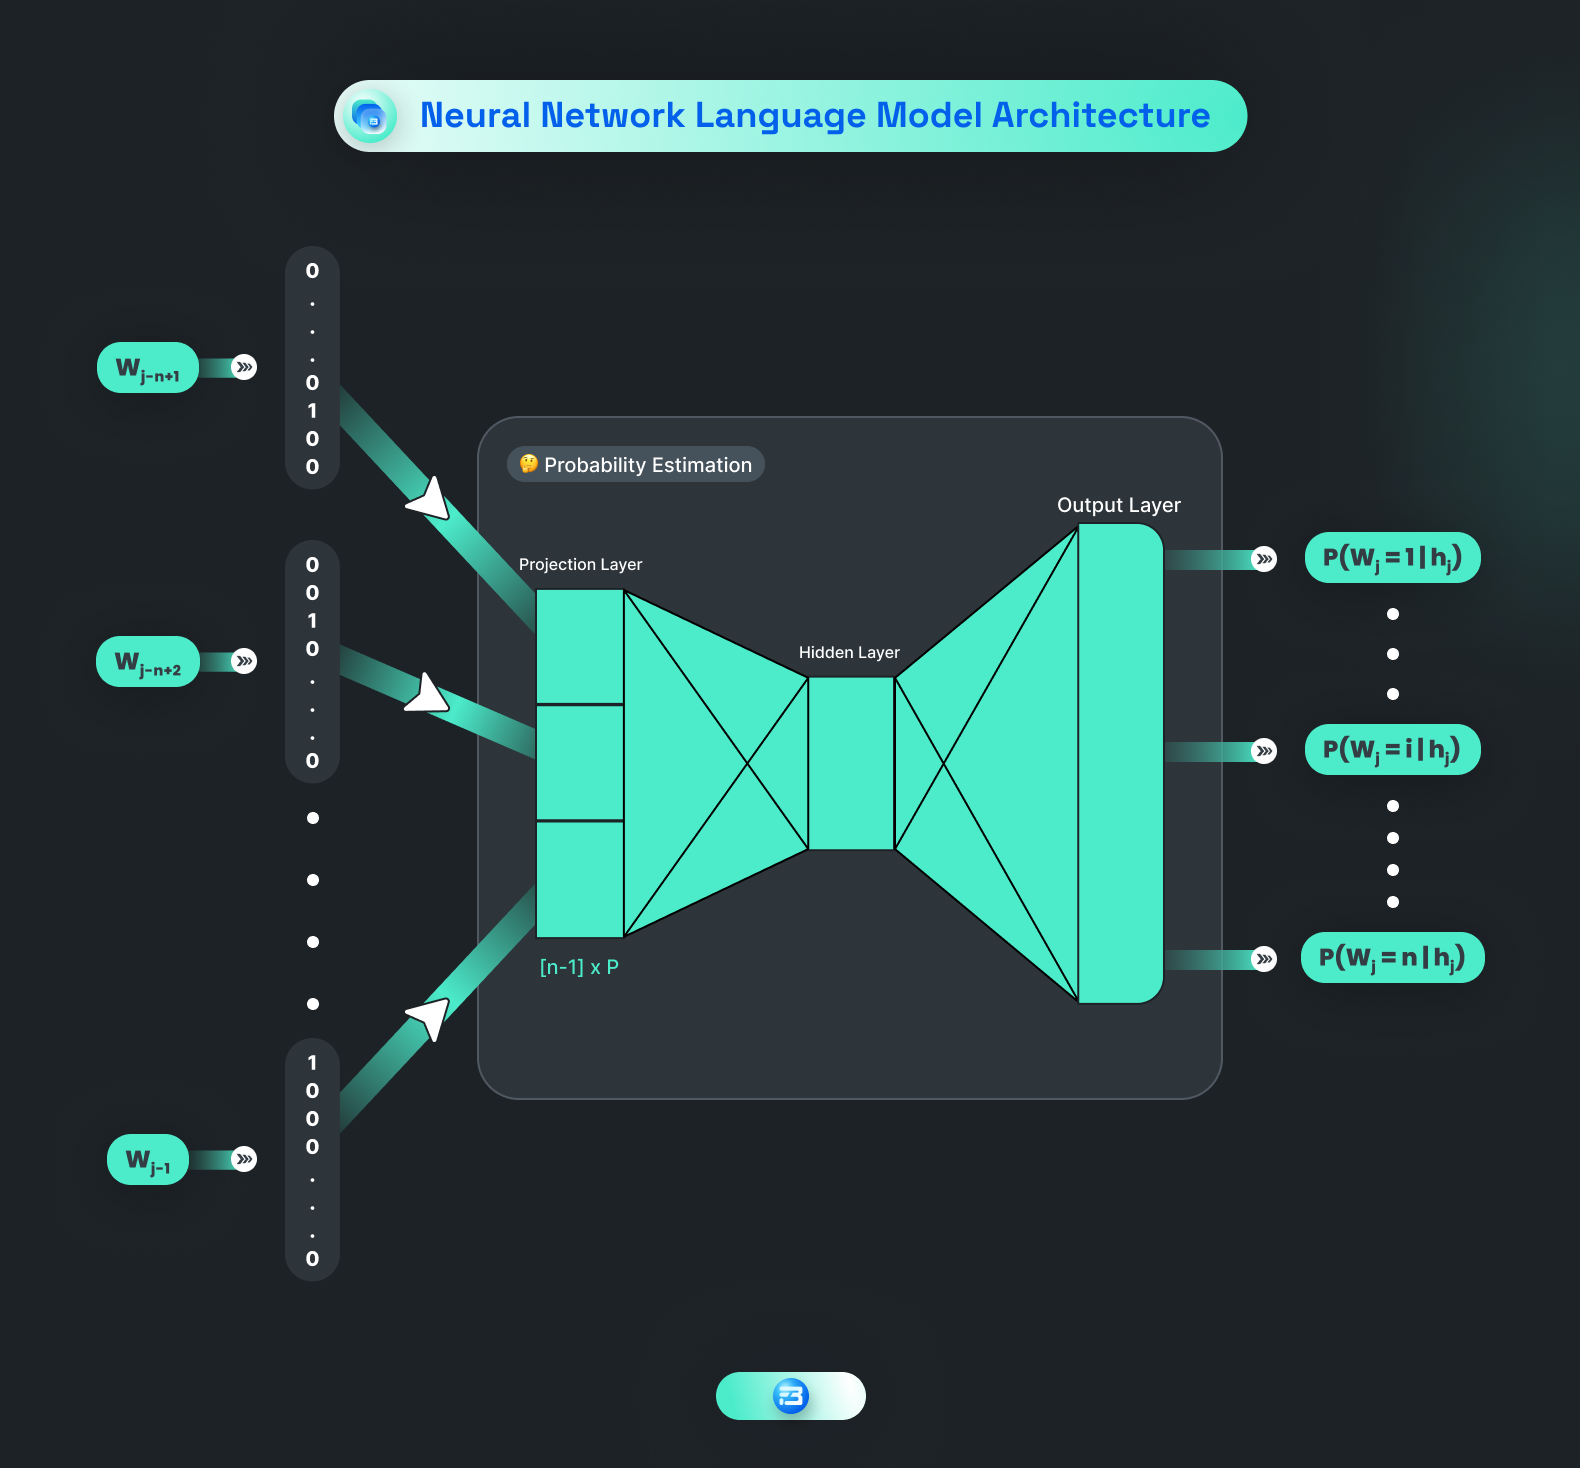 This image showcases the architecture of a neural network language model, which is a type of machine learning model that predicts the likelihood of a sequence of words in a sentence.